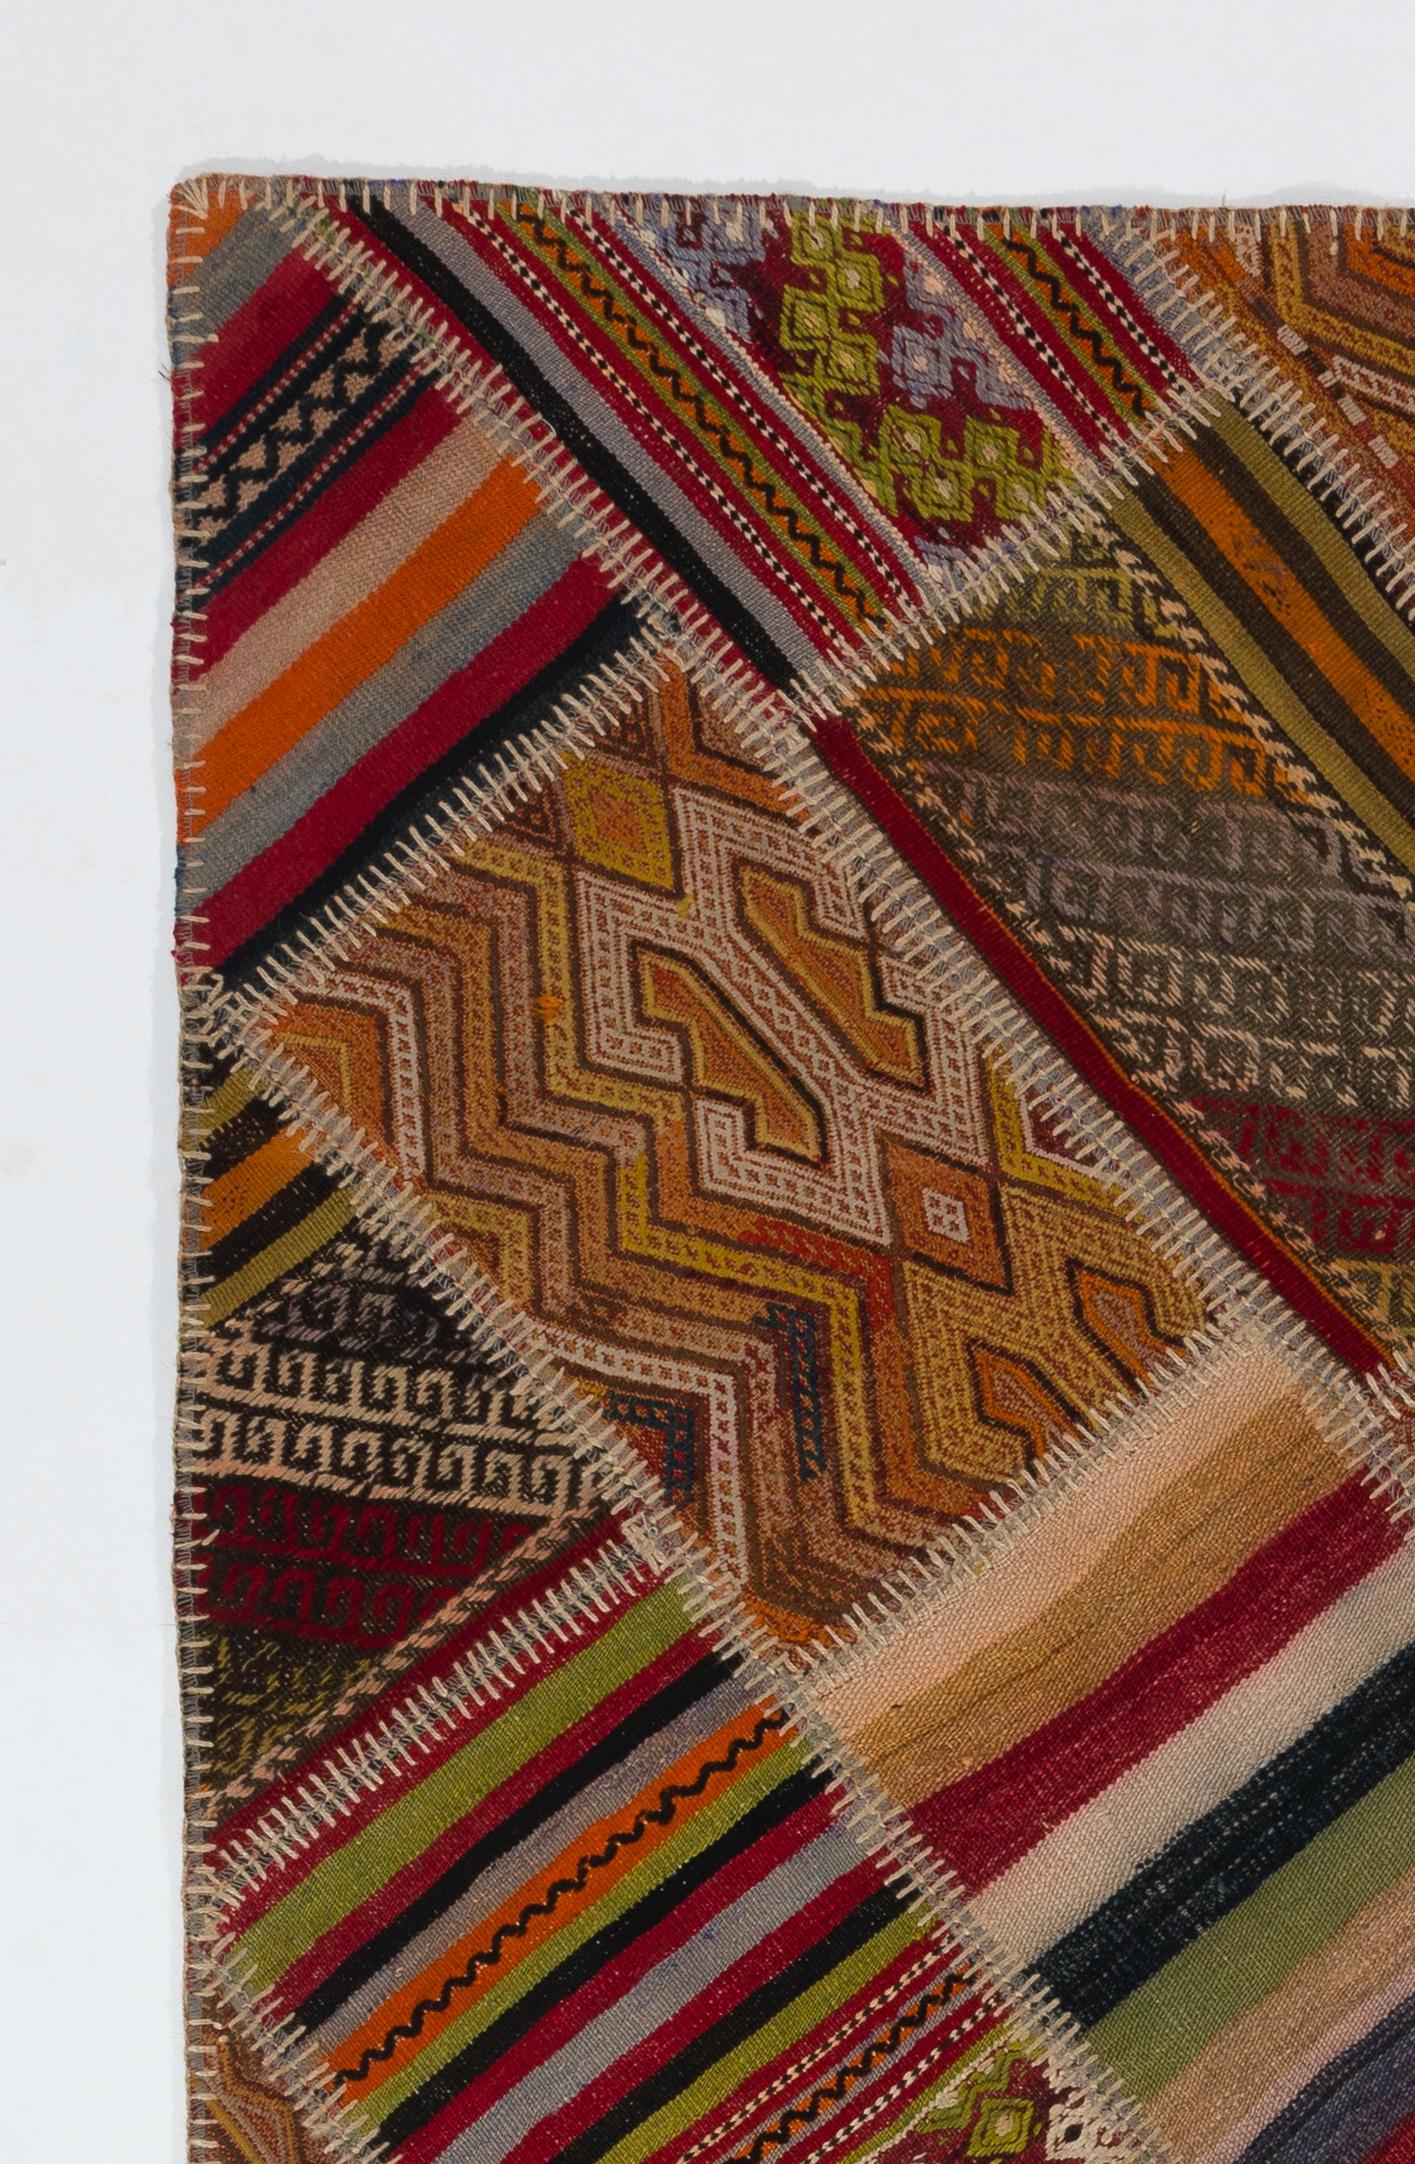 This Patchwork rug is hand-made from assorted pieces of vintage Turkish Kilims (flat-woven rugs), it is reinforced with a durable cotton twill/underlay stitched on the back for a smooth finish and extra thickness. Measures:4 x 6.3 ft.

The banded